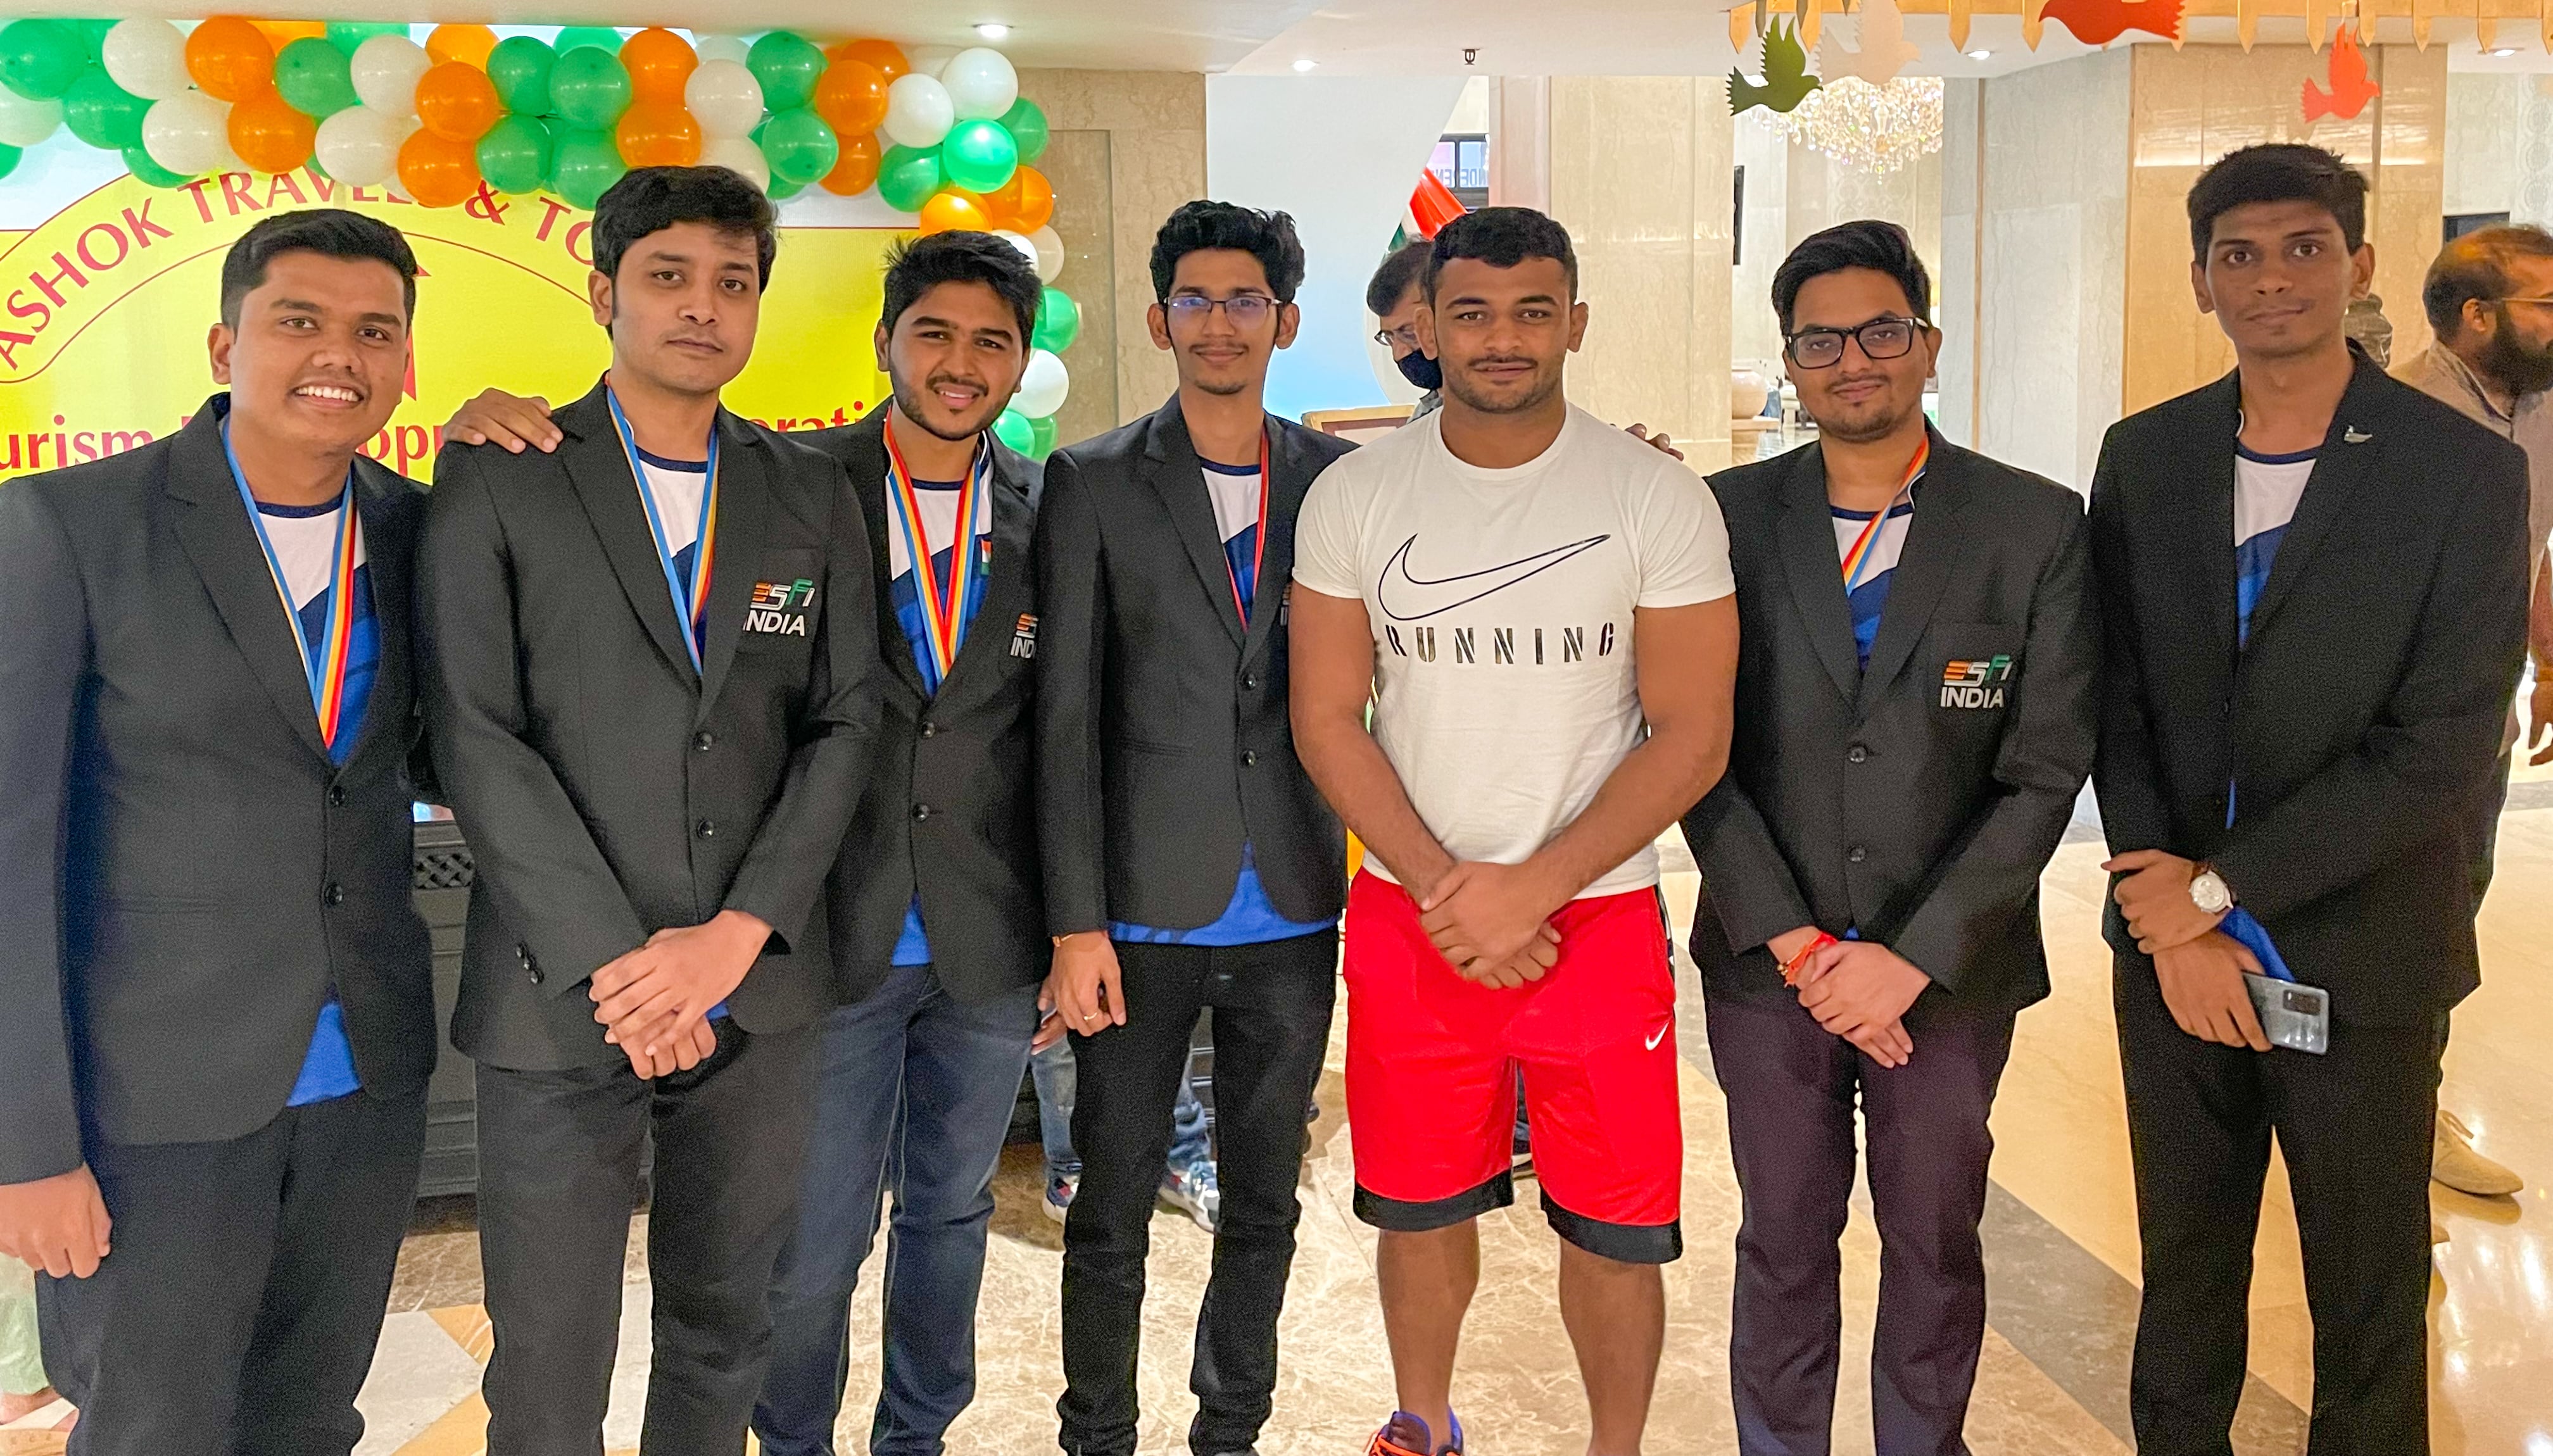 CEC 2022: Indian Olympic Association felicitates Bronze Medallist contingent of Dota 2 at Commonwealth Esports Championships 2022